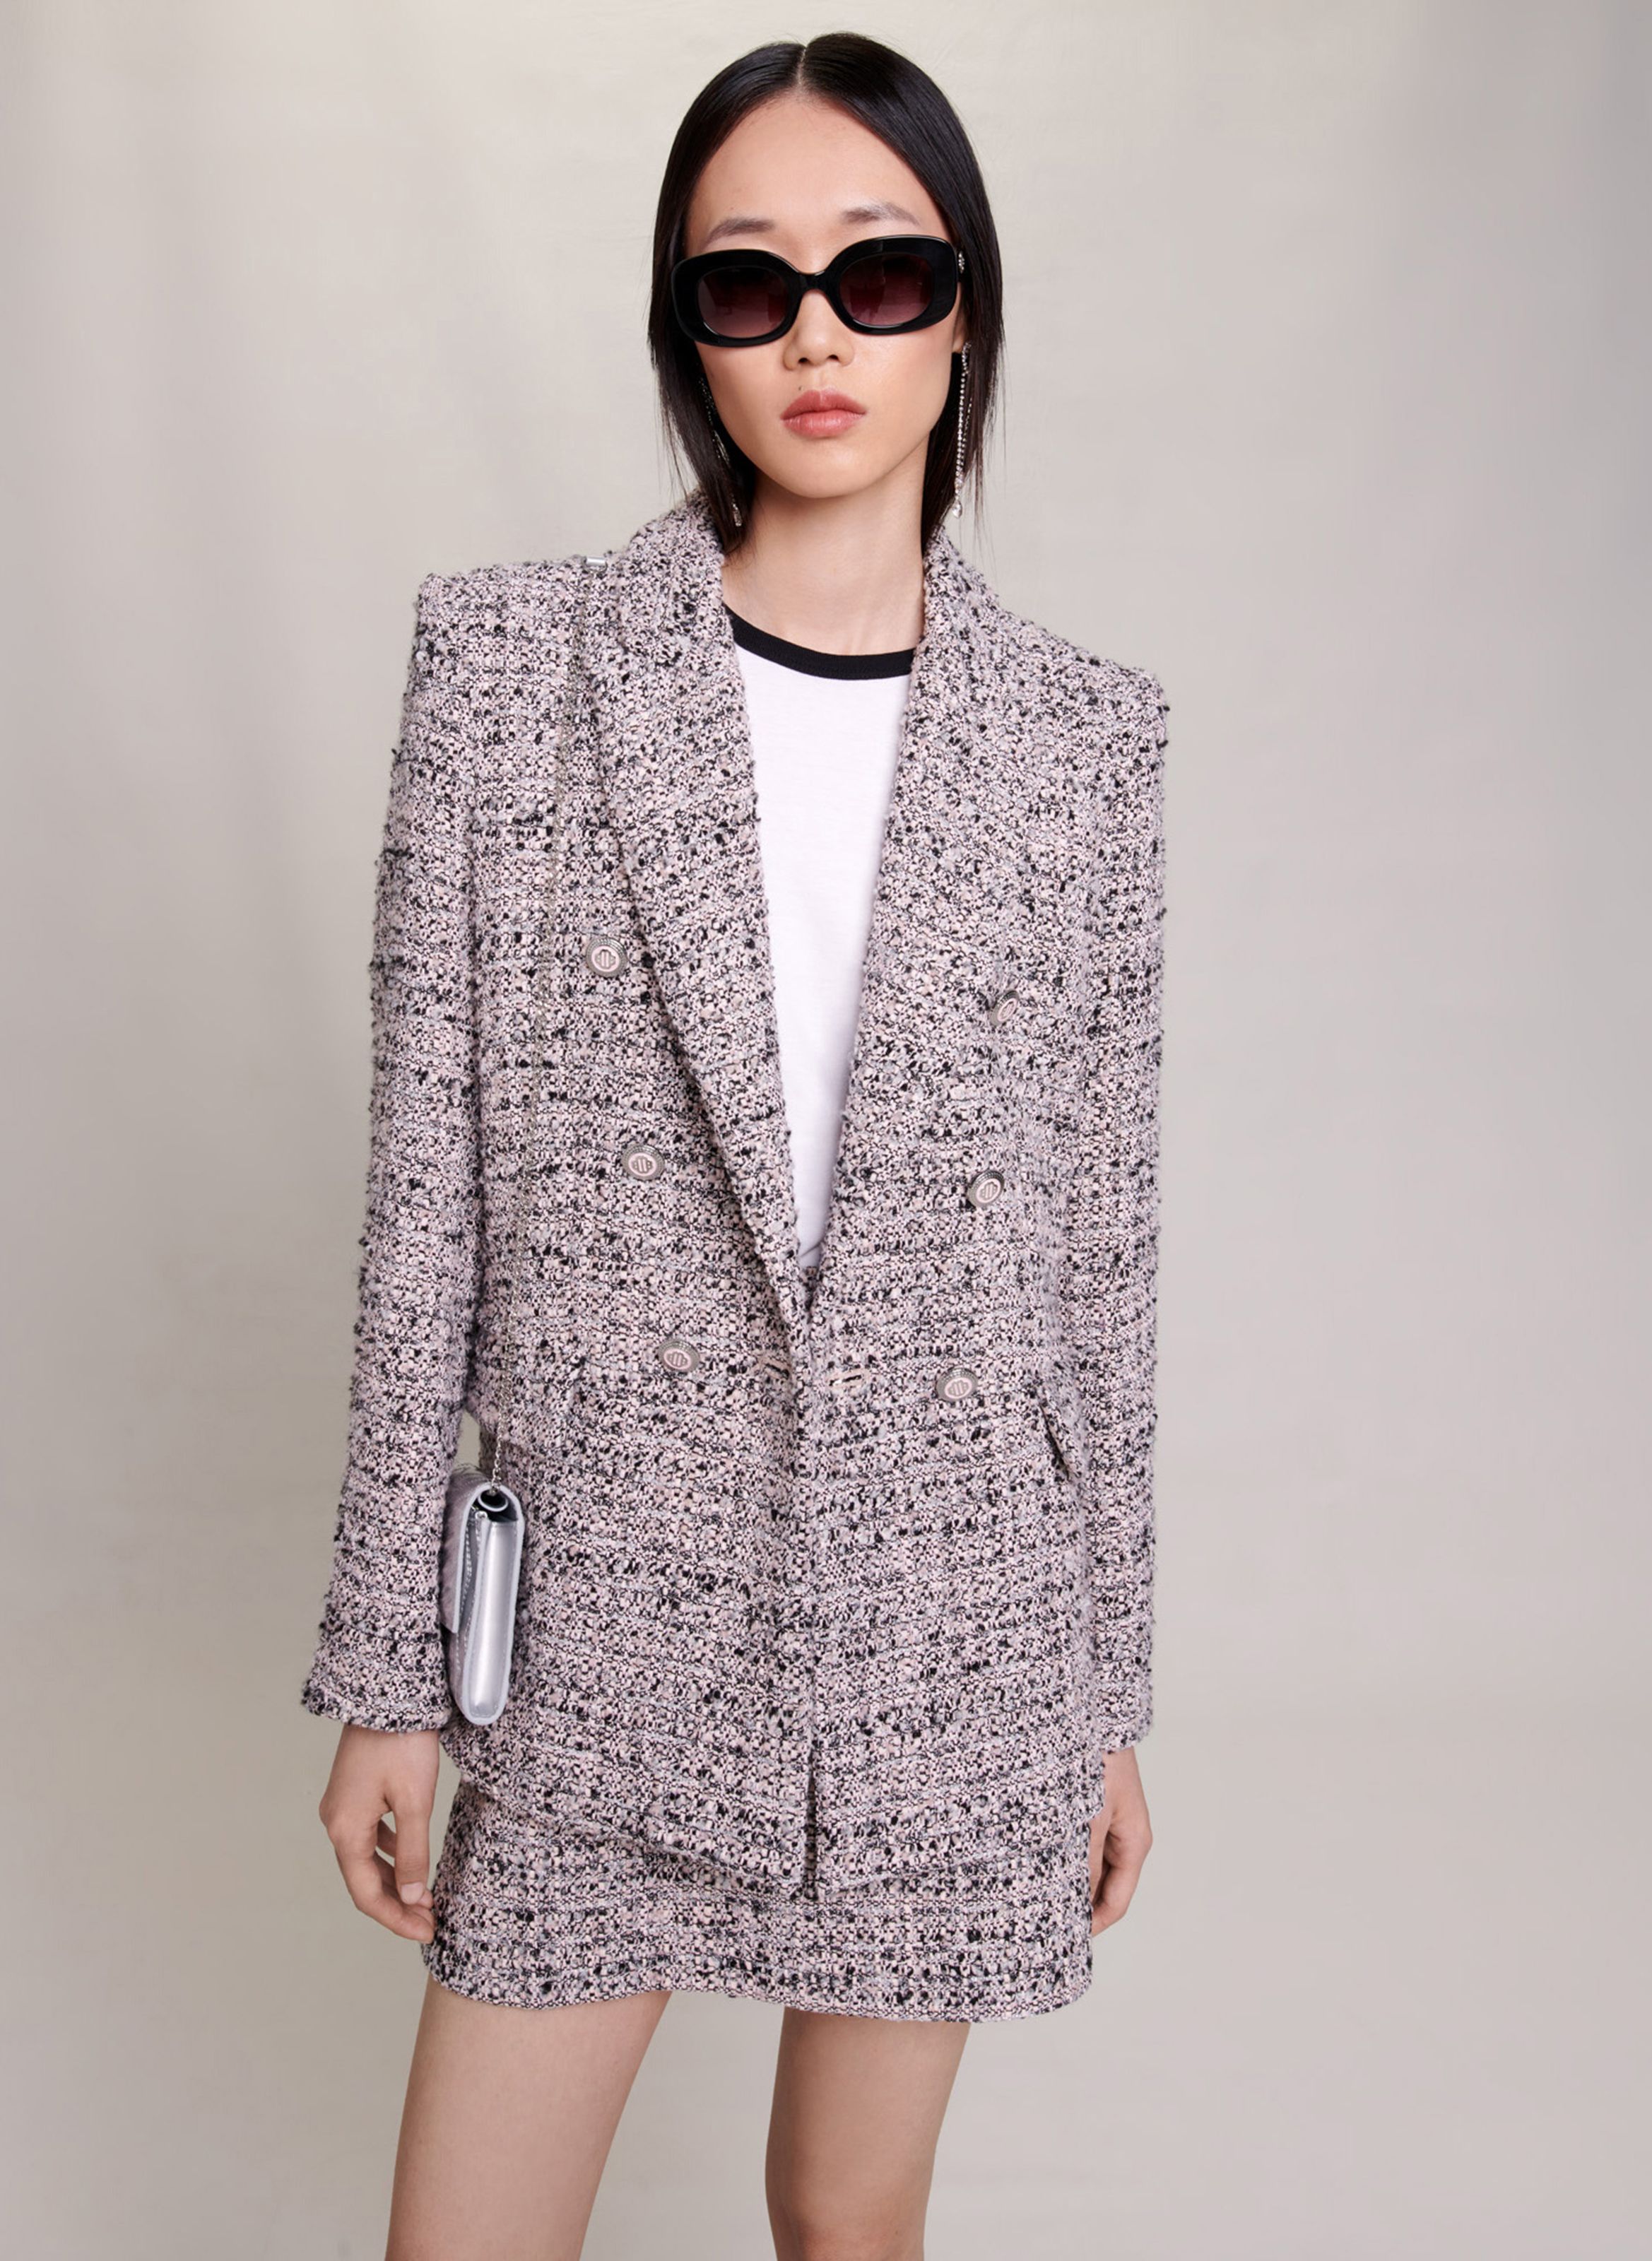 Discover 240+ tweed suit women latest